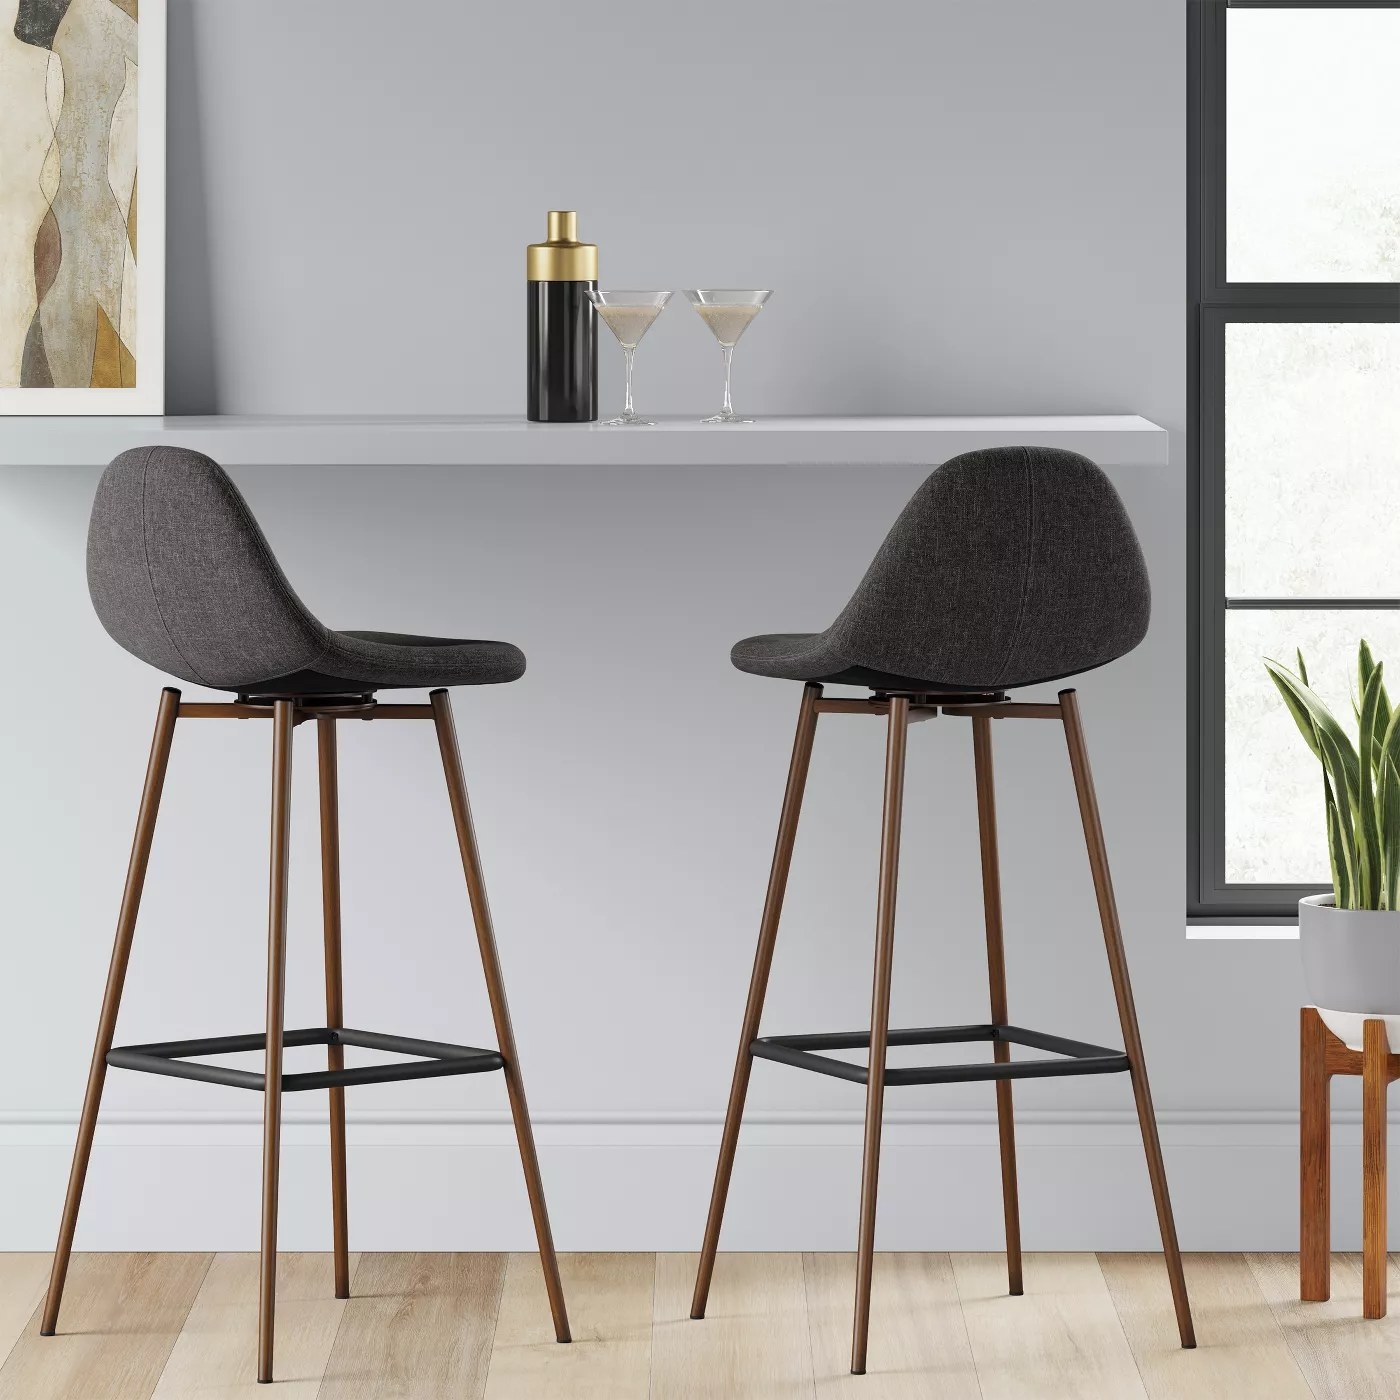 Two bar stools placed adjacent to each other